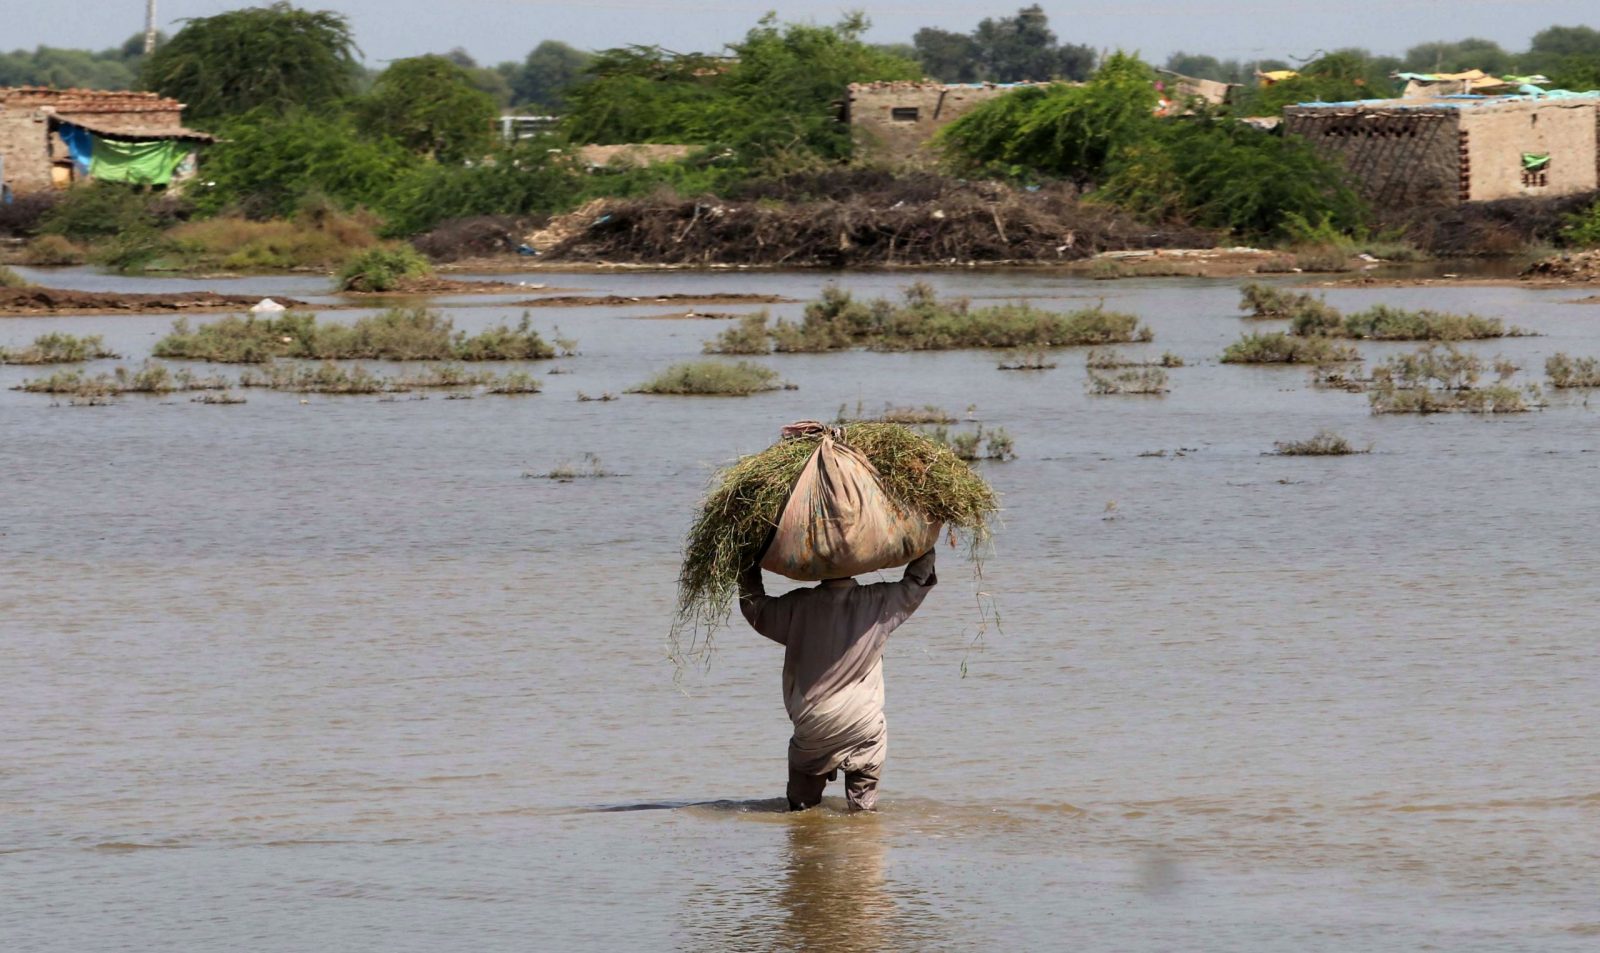 epa10167198 A man carries food for cattle in flooded areas in Mirpur Khas district, Sindh province, Pakistan, 07 September 2022. According to the National Disaster Management Authority (NDMA), flash floods triggered by heavy monsoon rains have killed over 1200 people across Pakistan since mid-June 2022. More than 33 million people have been affected by floods, the country's climate change minister Sherry Rehman said.  EPA/REHAN KHAN